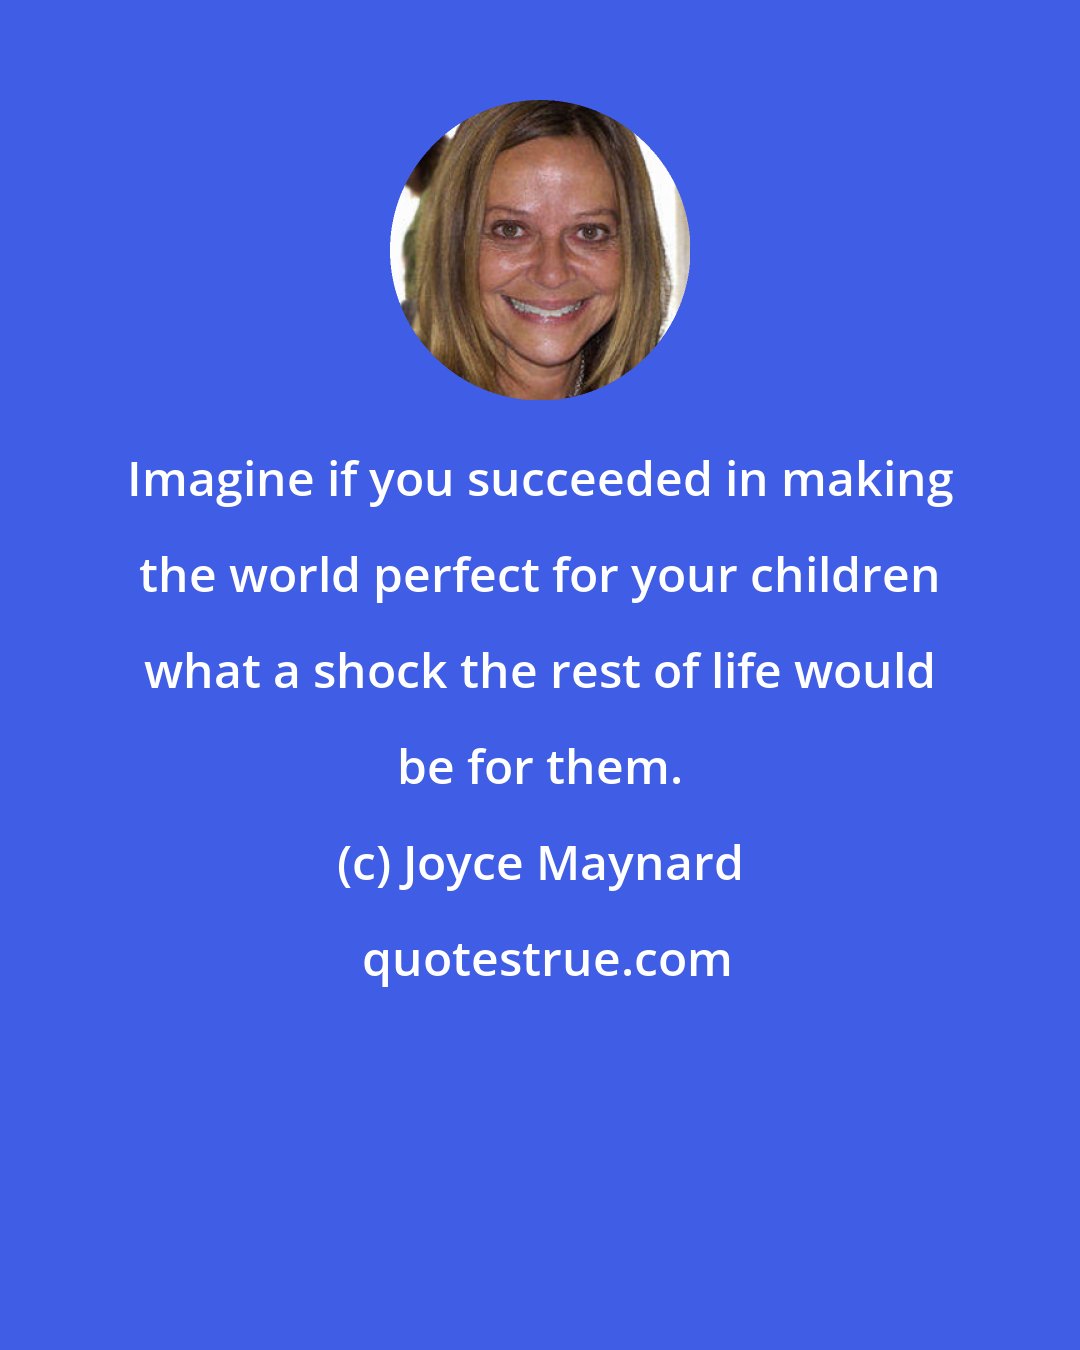 Joyce Maynard: Imagine if you succeeded in making the world perfect for your children what a shock the rest of life would be for them.